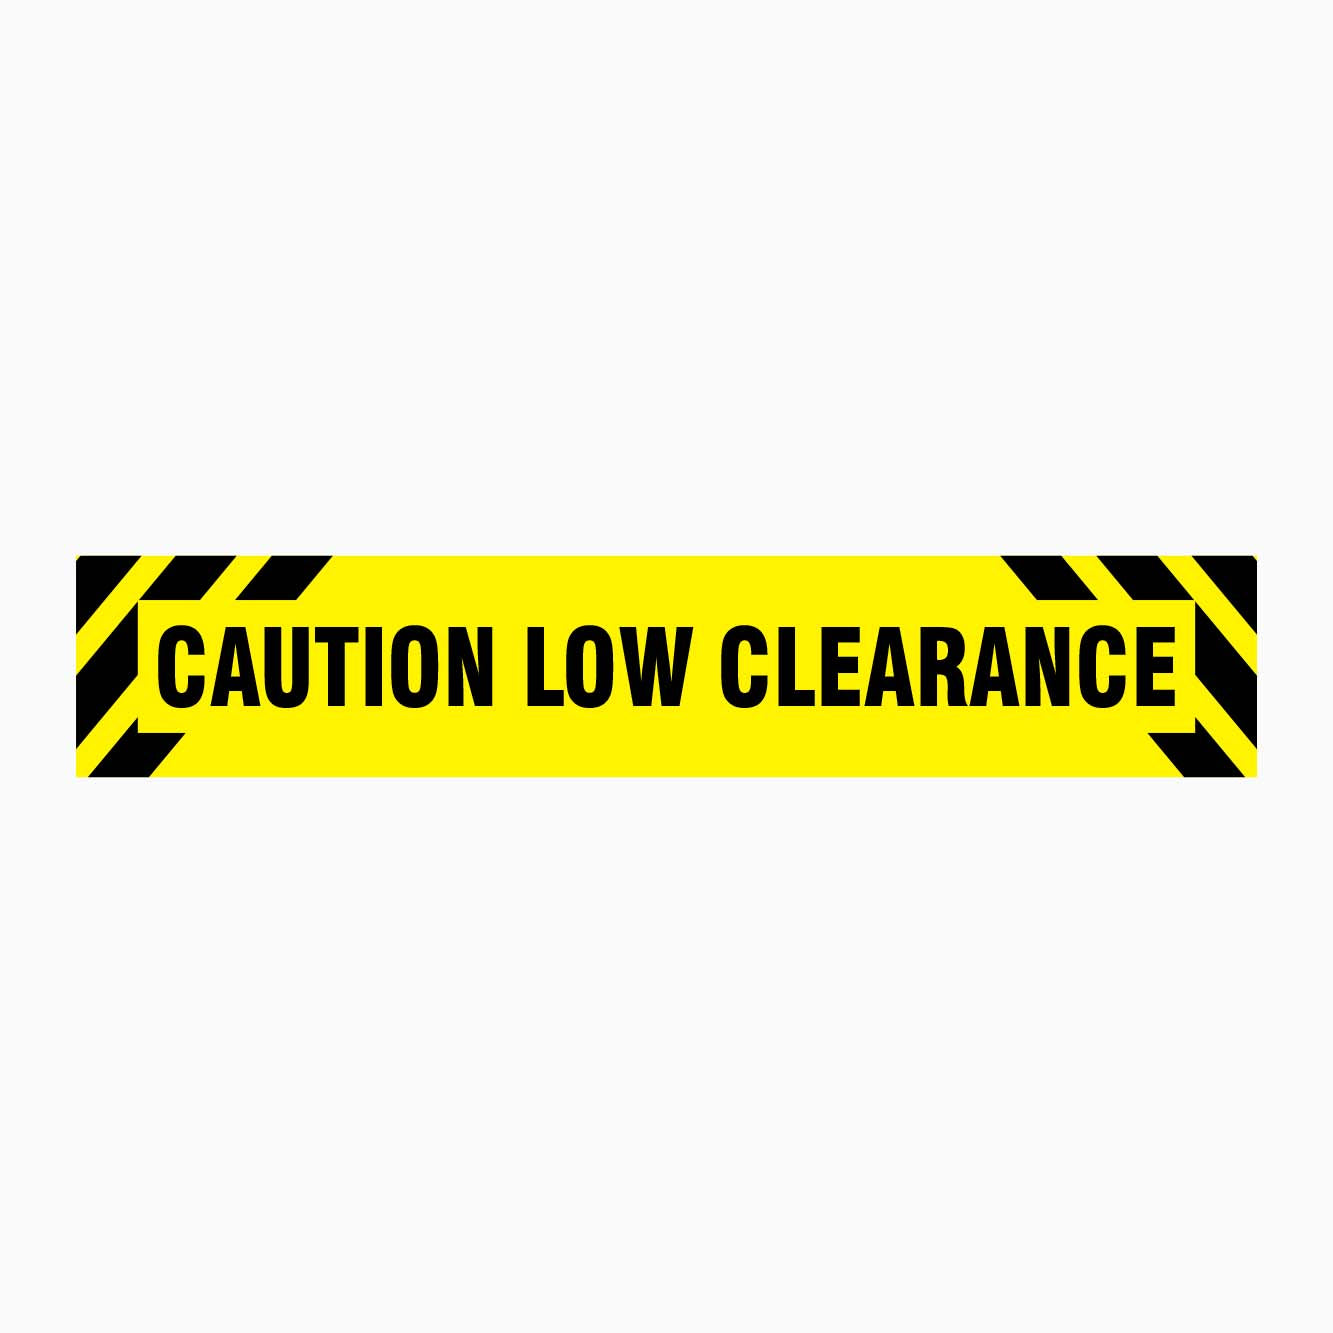 CAUTION LOW CLEARANCE SIGN